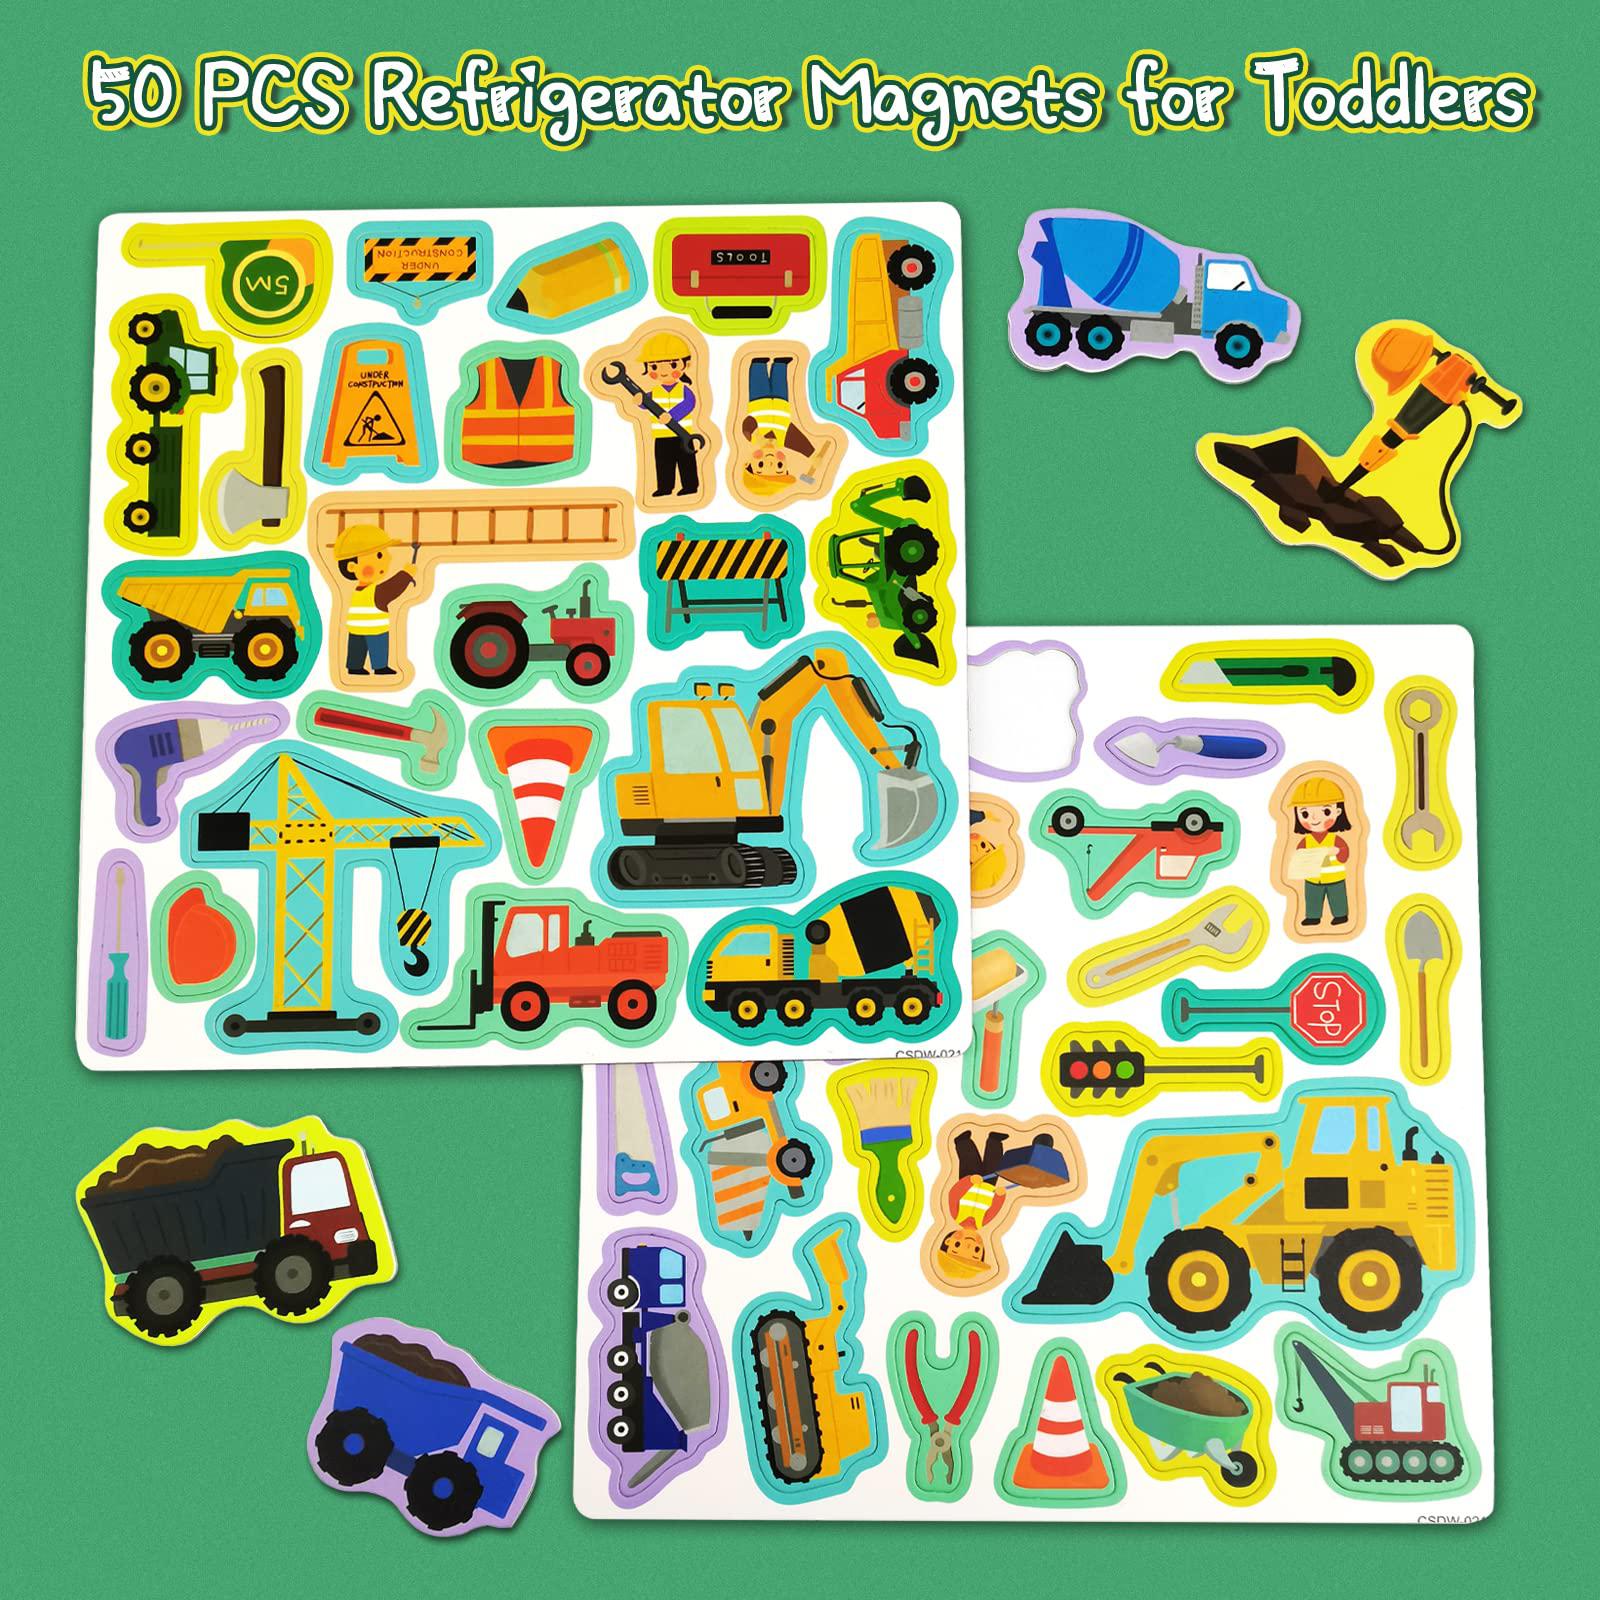 xylolin construction site fridge magnets for toddlers, 50 pcs refrigerator magnets for kids, create a scene magnetic play sticker boo